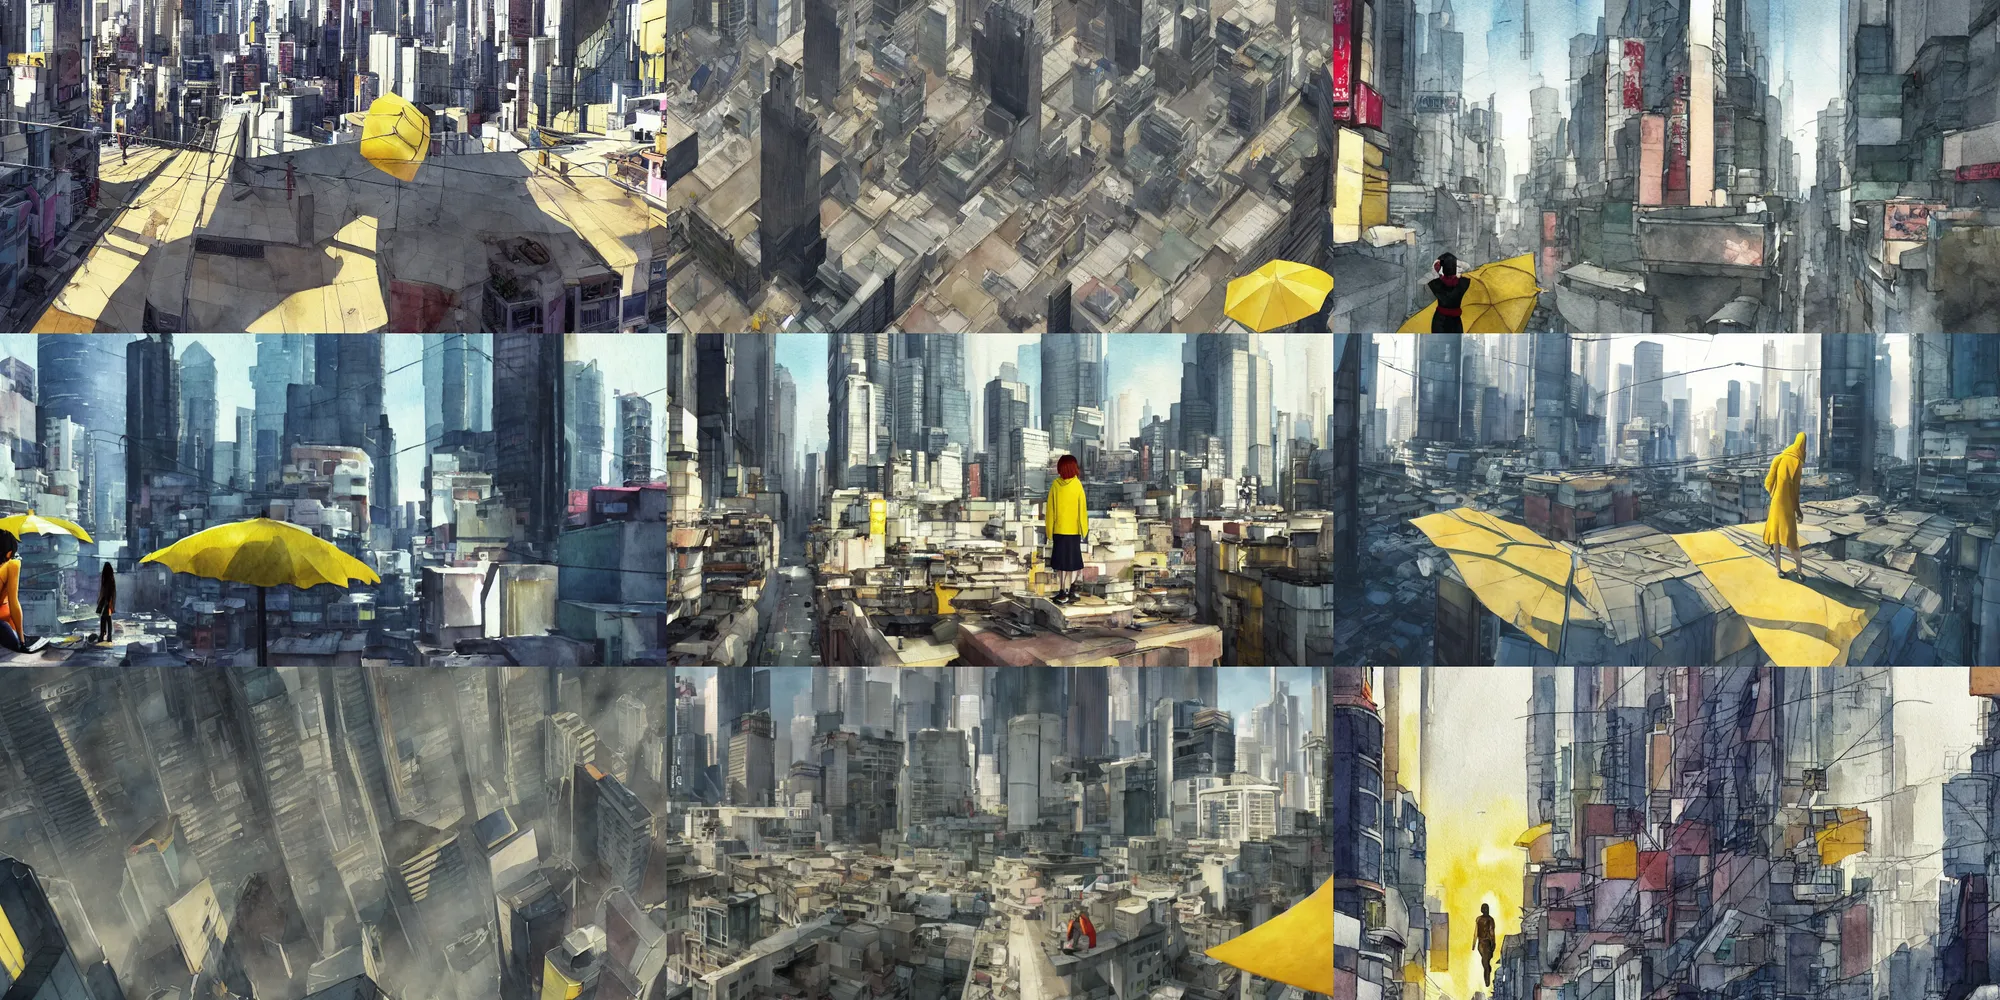 Prompt: incredible curvilinear screenshot, mirrors edge game, simple curvilinear watercolor, simple watercolor, paper texture, rooftop ghost in the shell movie scene, rooftop distant shot of hoody girl side view sitting under a yellow striped parasol in deserted dusty shinjuku junk town, streets below, fear of heights, vertigo, holding on to the edge,old pawn shop, bright sun bleached ground ,scary chameleon face muscle robot monster lurks in the background, ghost mask, teeth, animatronic, black smoke, pale beige sky, junk tv, texture, strange, impossible, fur, spines, mouth, pipe brain, shell, brown mud, dust, bored expression, overhead wires, telephone pole, dusty, dry, pencil marks, genius party,shinjuku, koju morimoto, katsuya terada, masamune shirow, tatsuyuki tanaka hd, 4k, remaster, dynamic camera angle, deep 3 point perspective, fish eye, dynamic scene